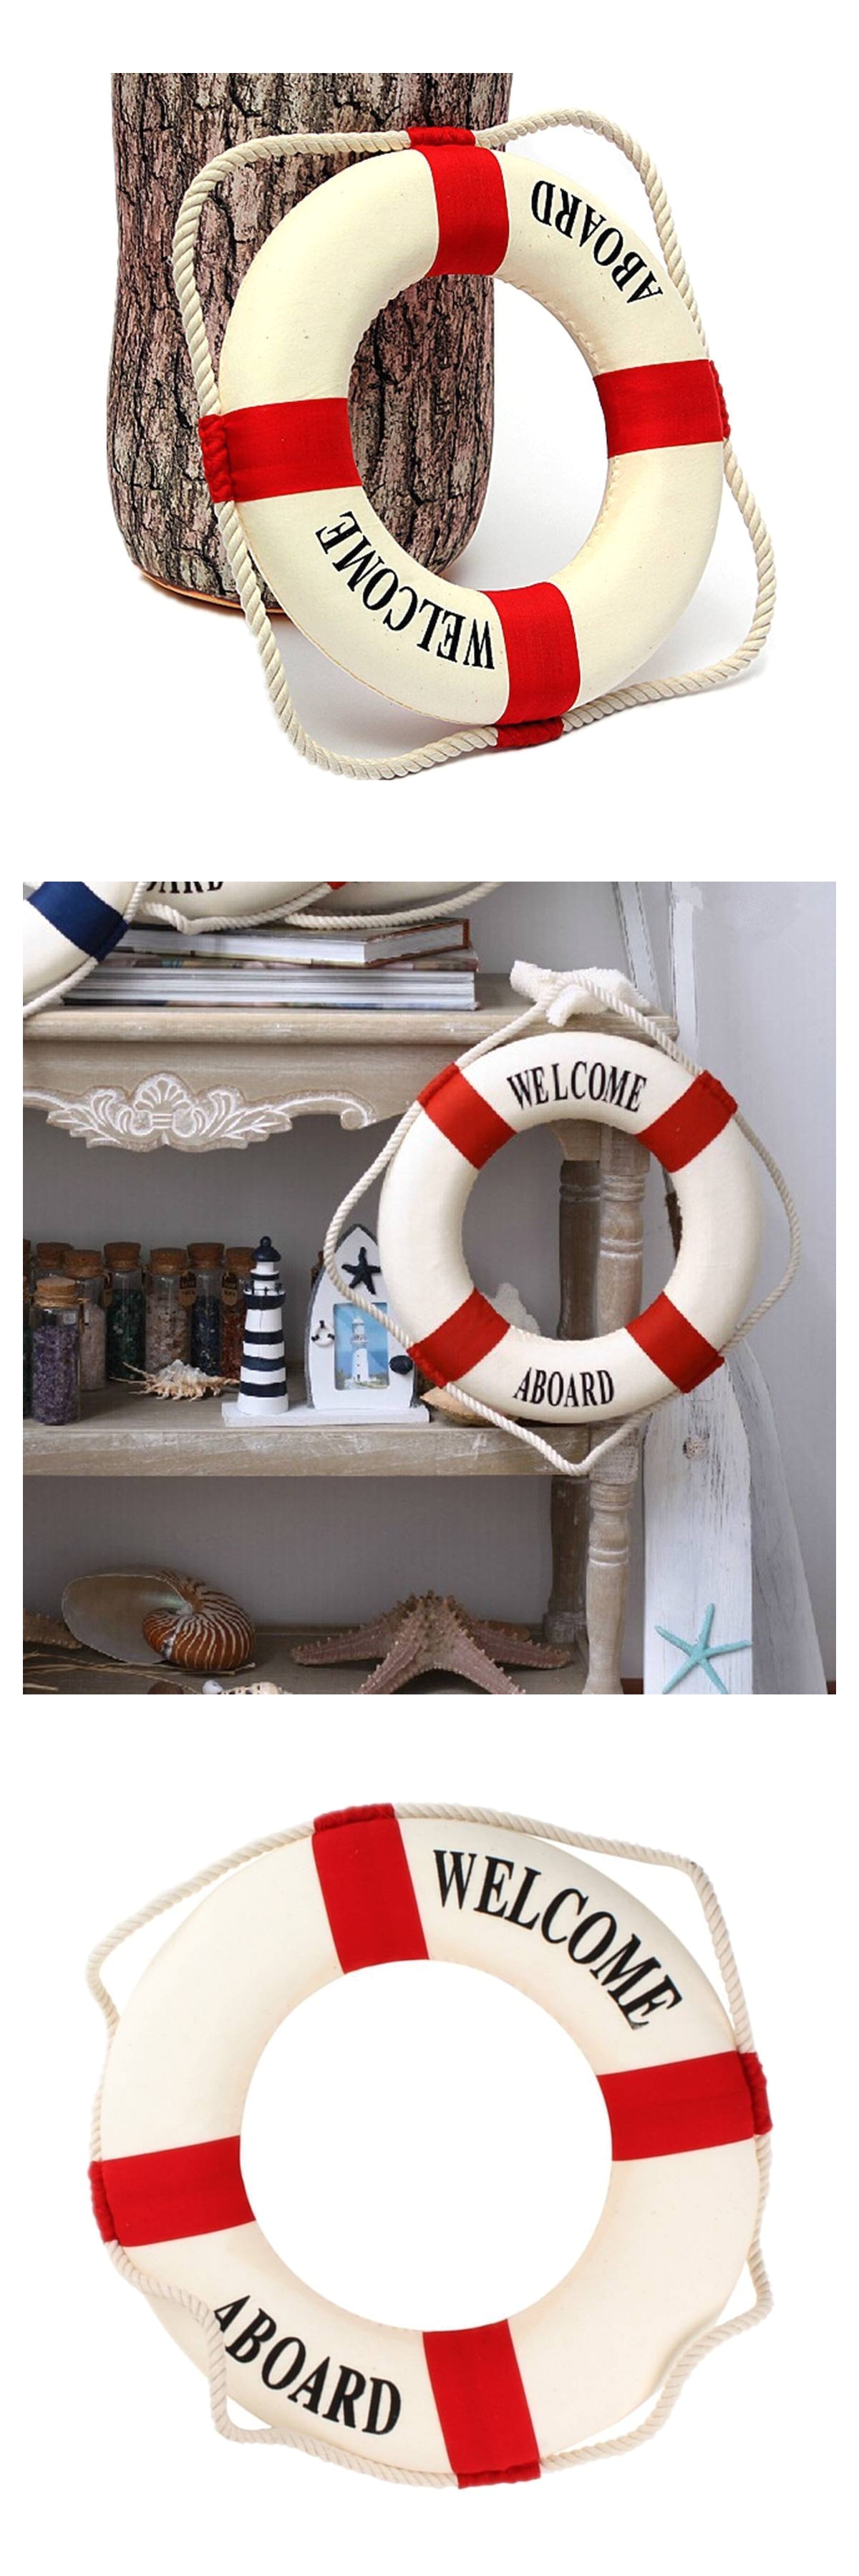 new welcome aboard foam nautical life lifebuoy ring boat wall hanging home decoration red 50cm 8 28